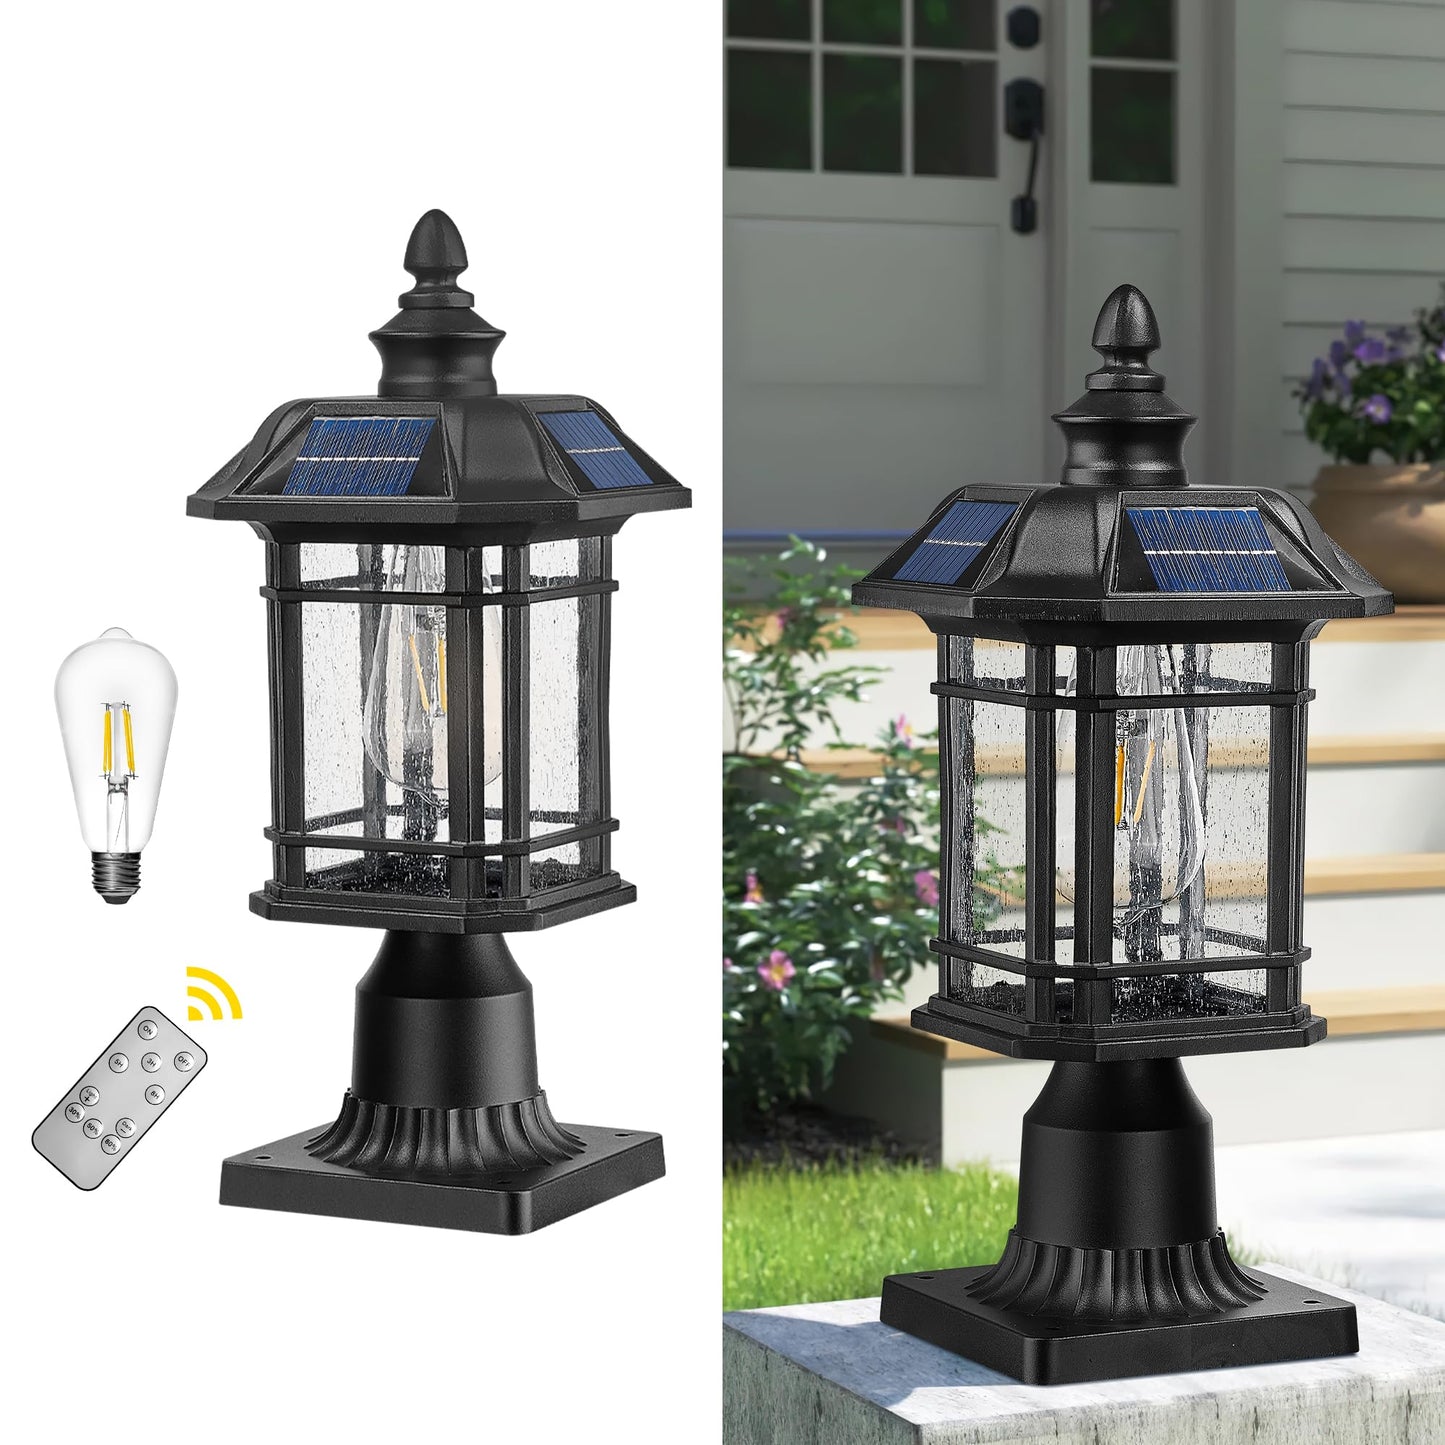 
                  
                    Emliviar 16 Inch Outdoor Solar Post Light, Dusk to Dawn Pier Mount Lamp Post Light with Remote Control, Black Finish with Seeded Glass Shade, A2202110P1-SL BK
                  
                